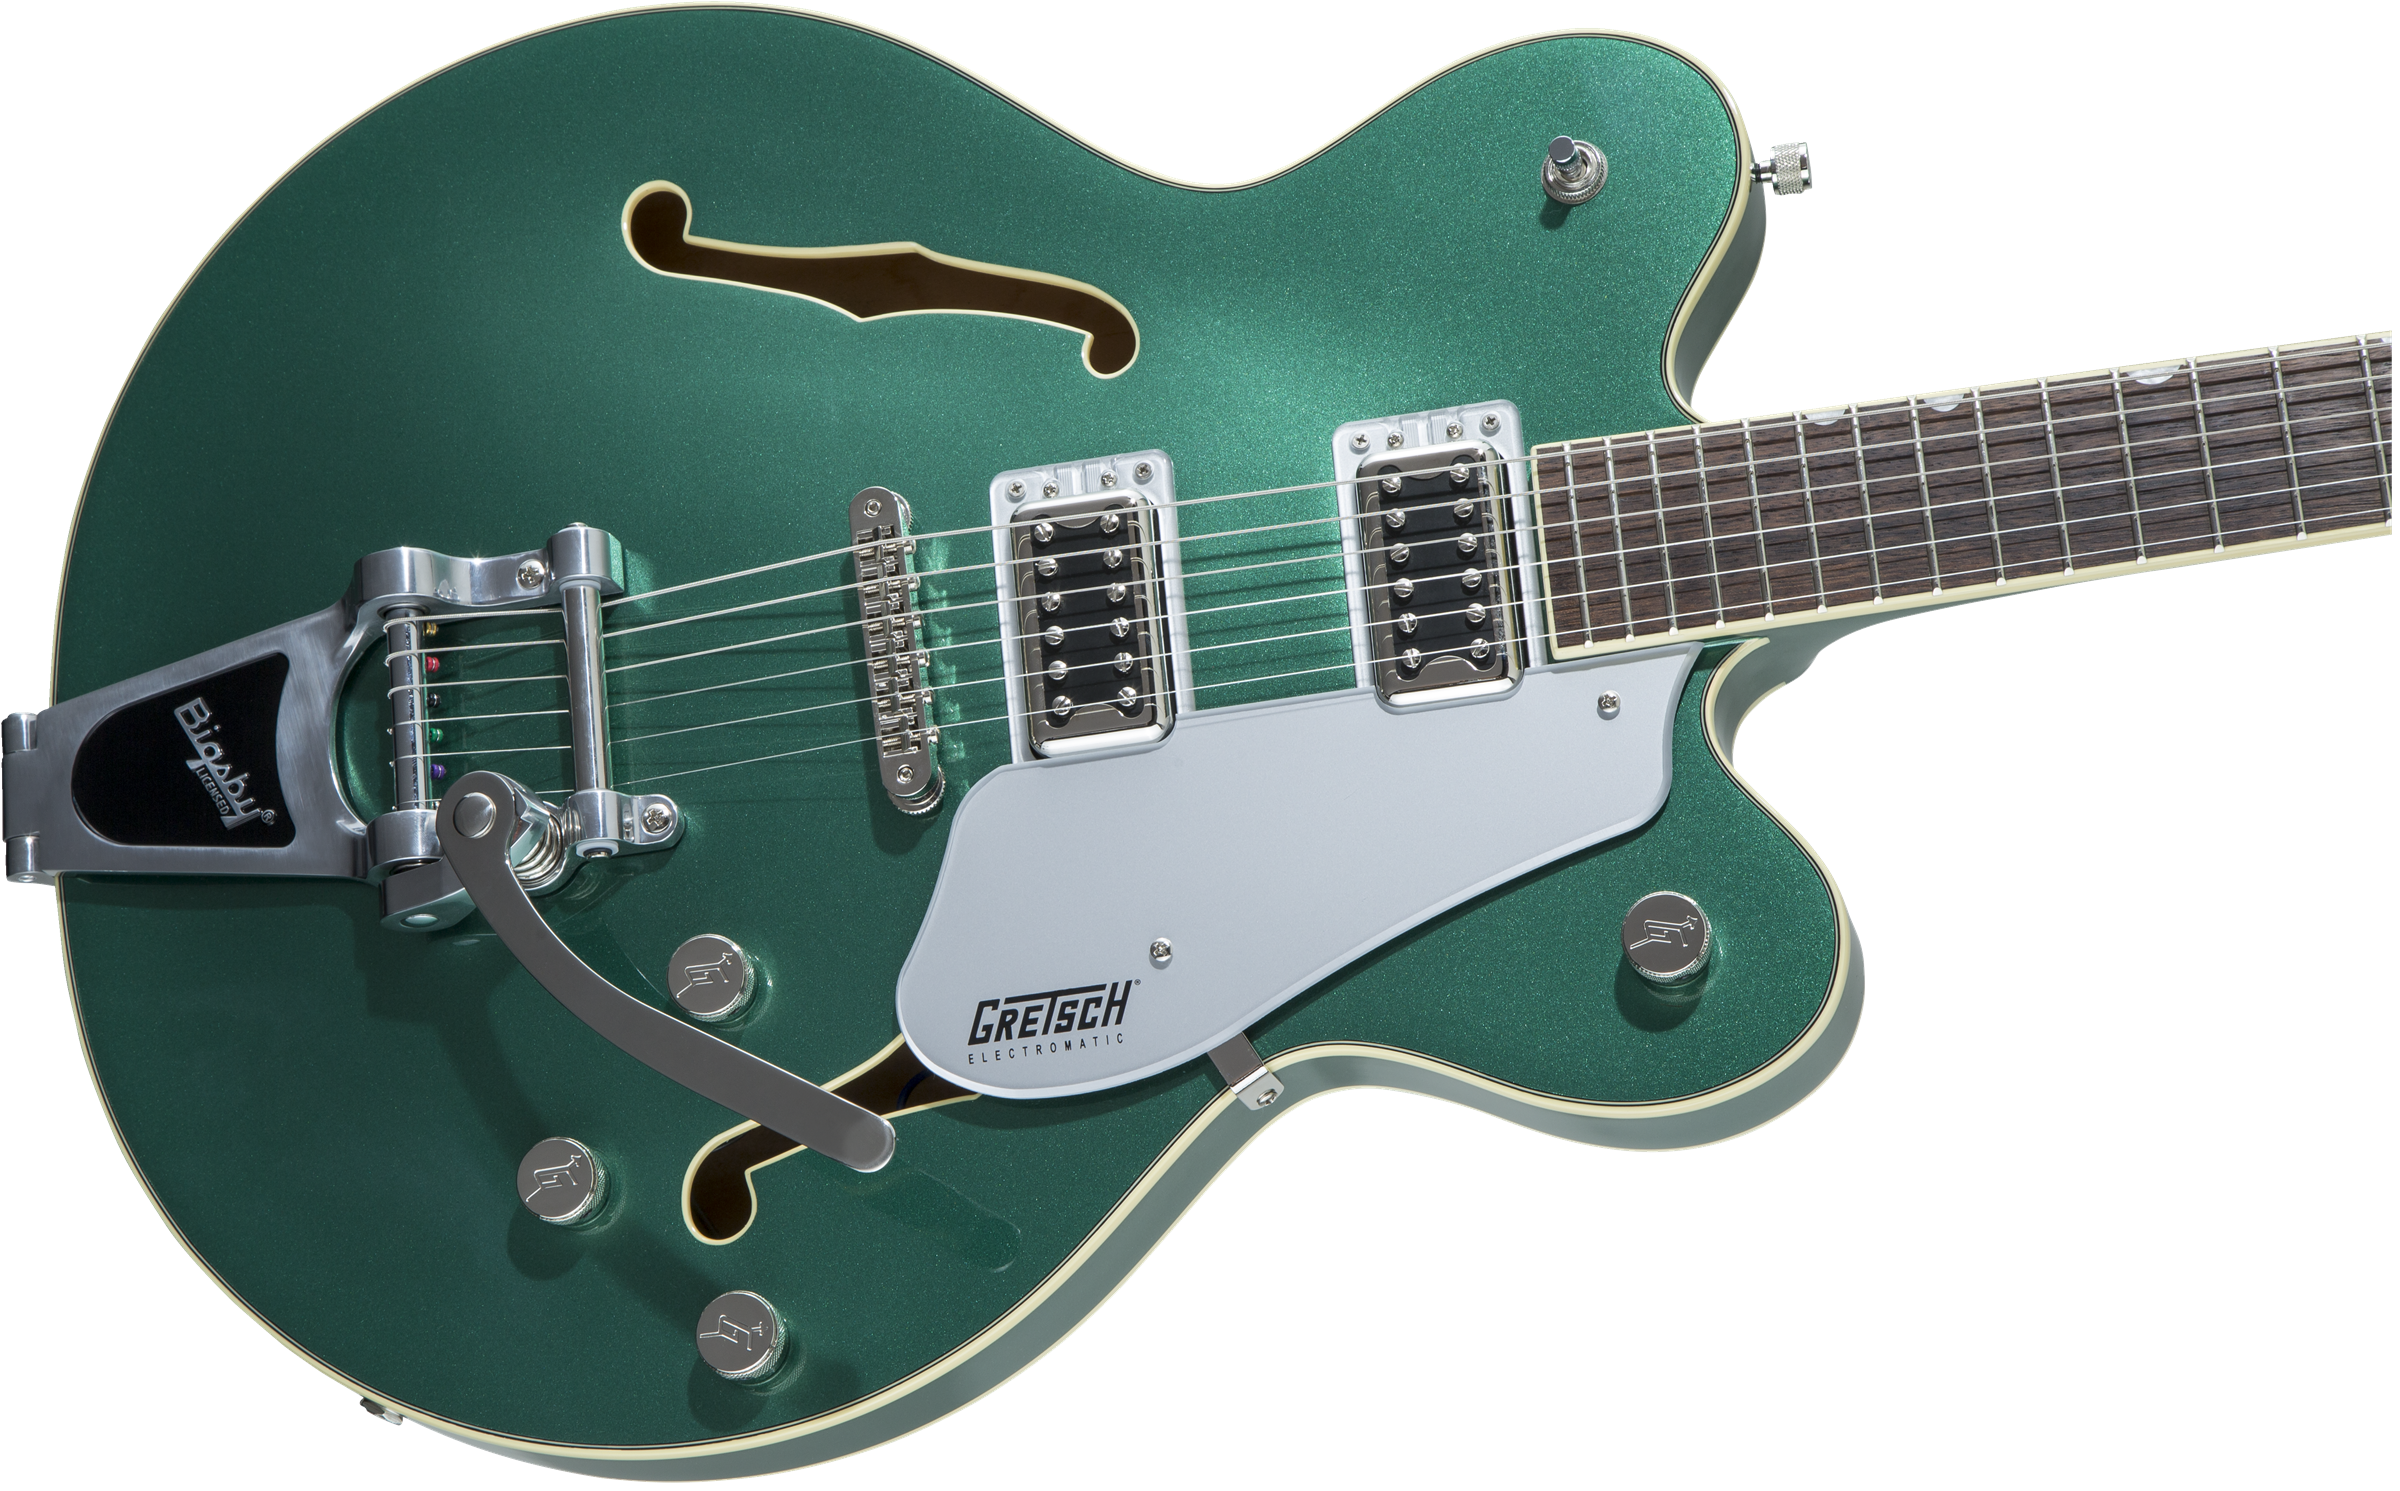 Gretsch G5622T Electromatic Center Block Double-Cut with Bigsby Laurel Fingerboard Georgia Green